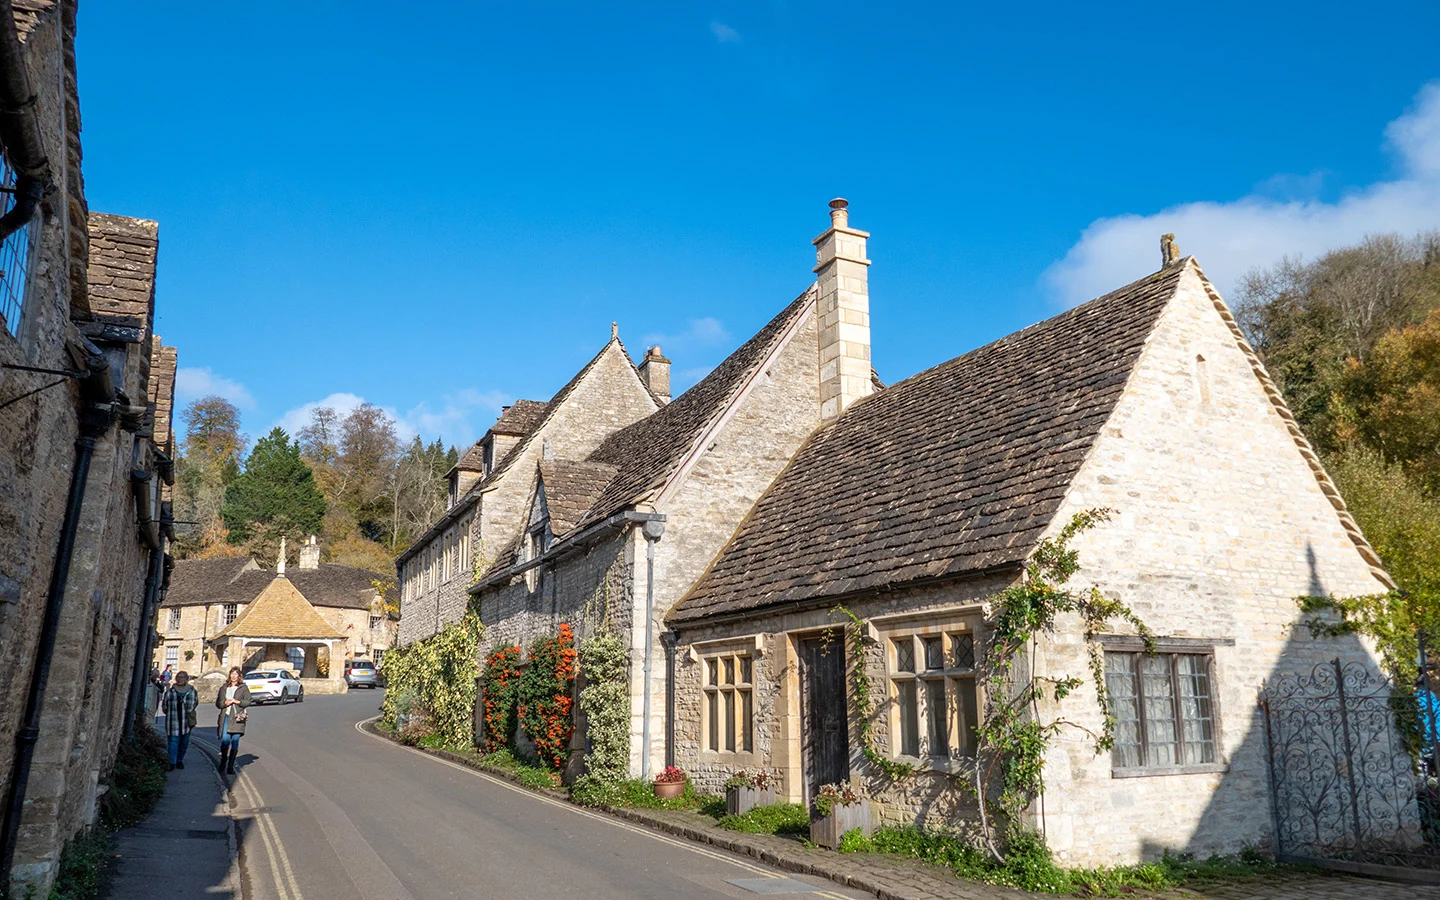 The Street running through Lower Castle Combe